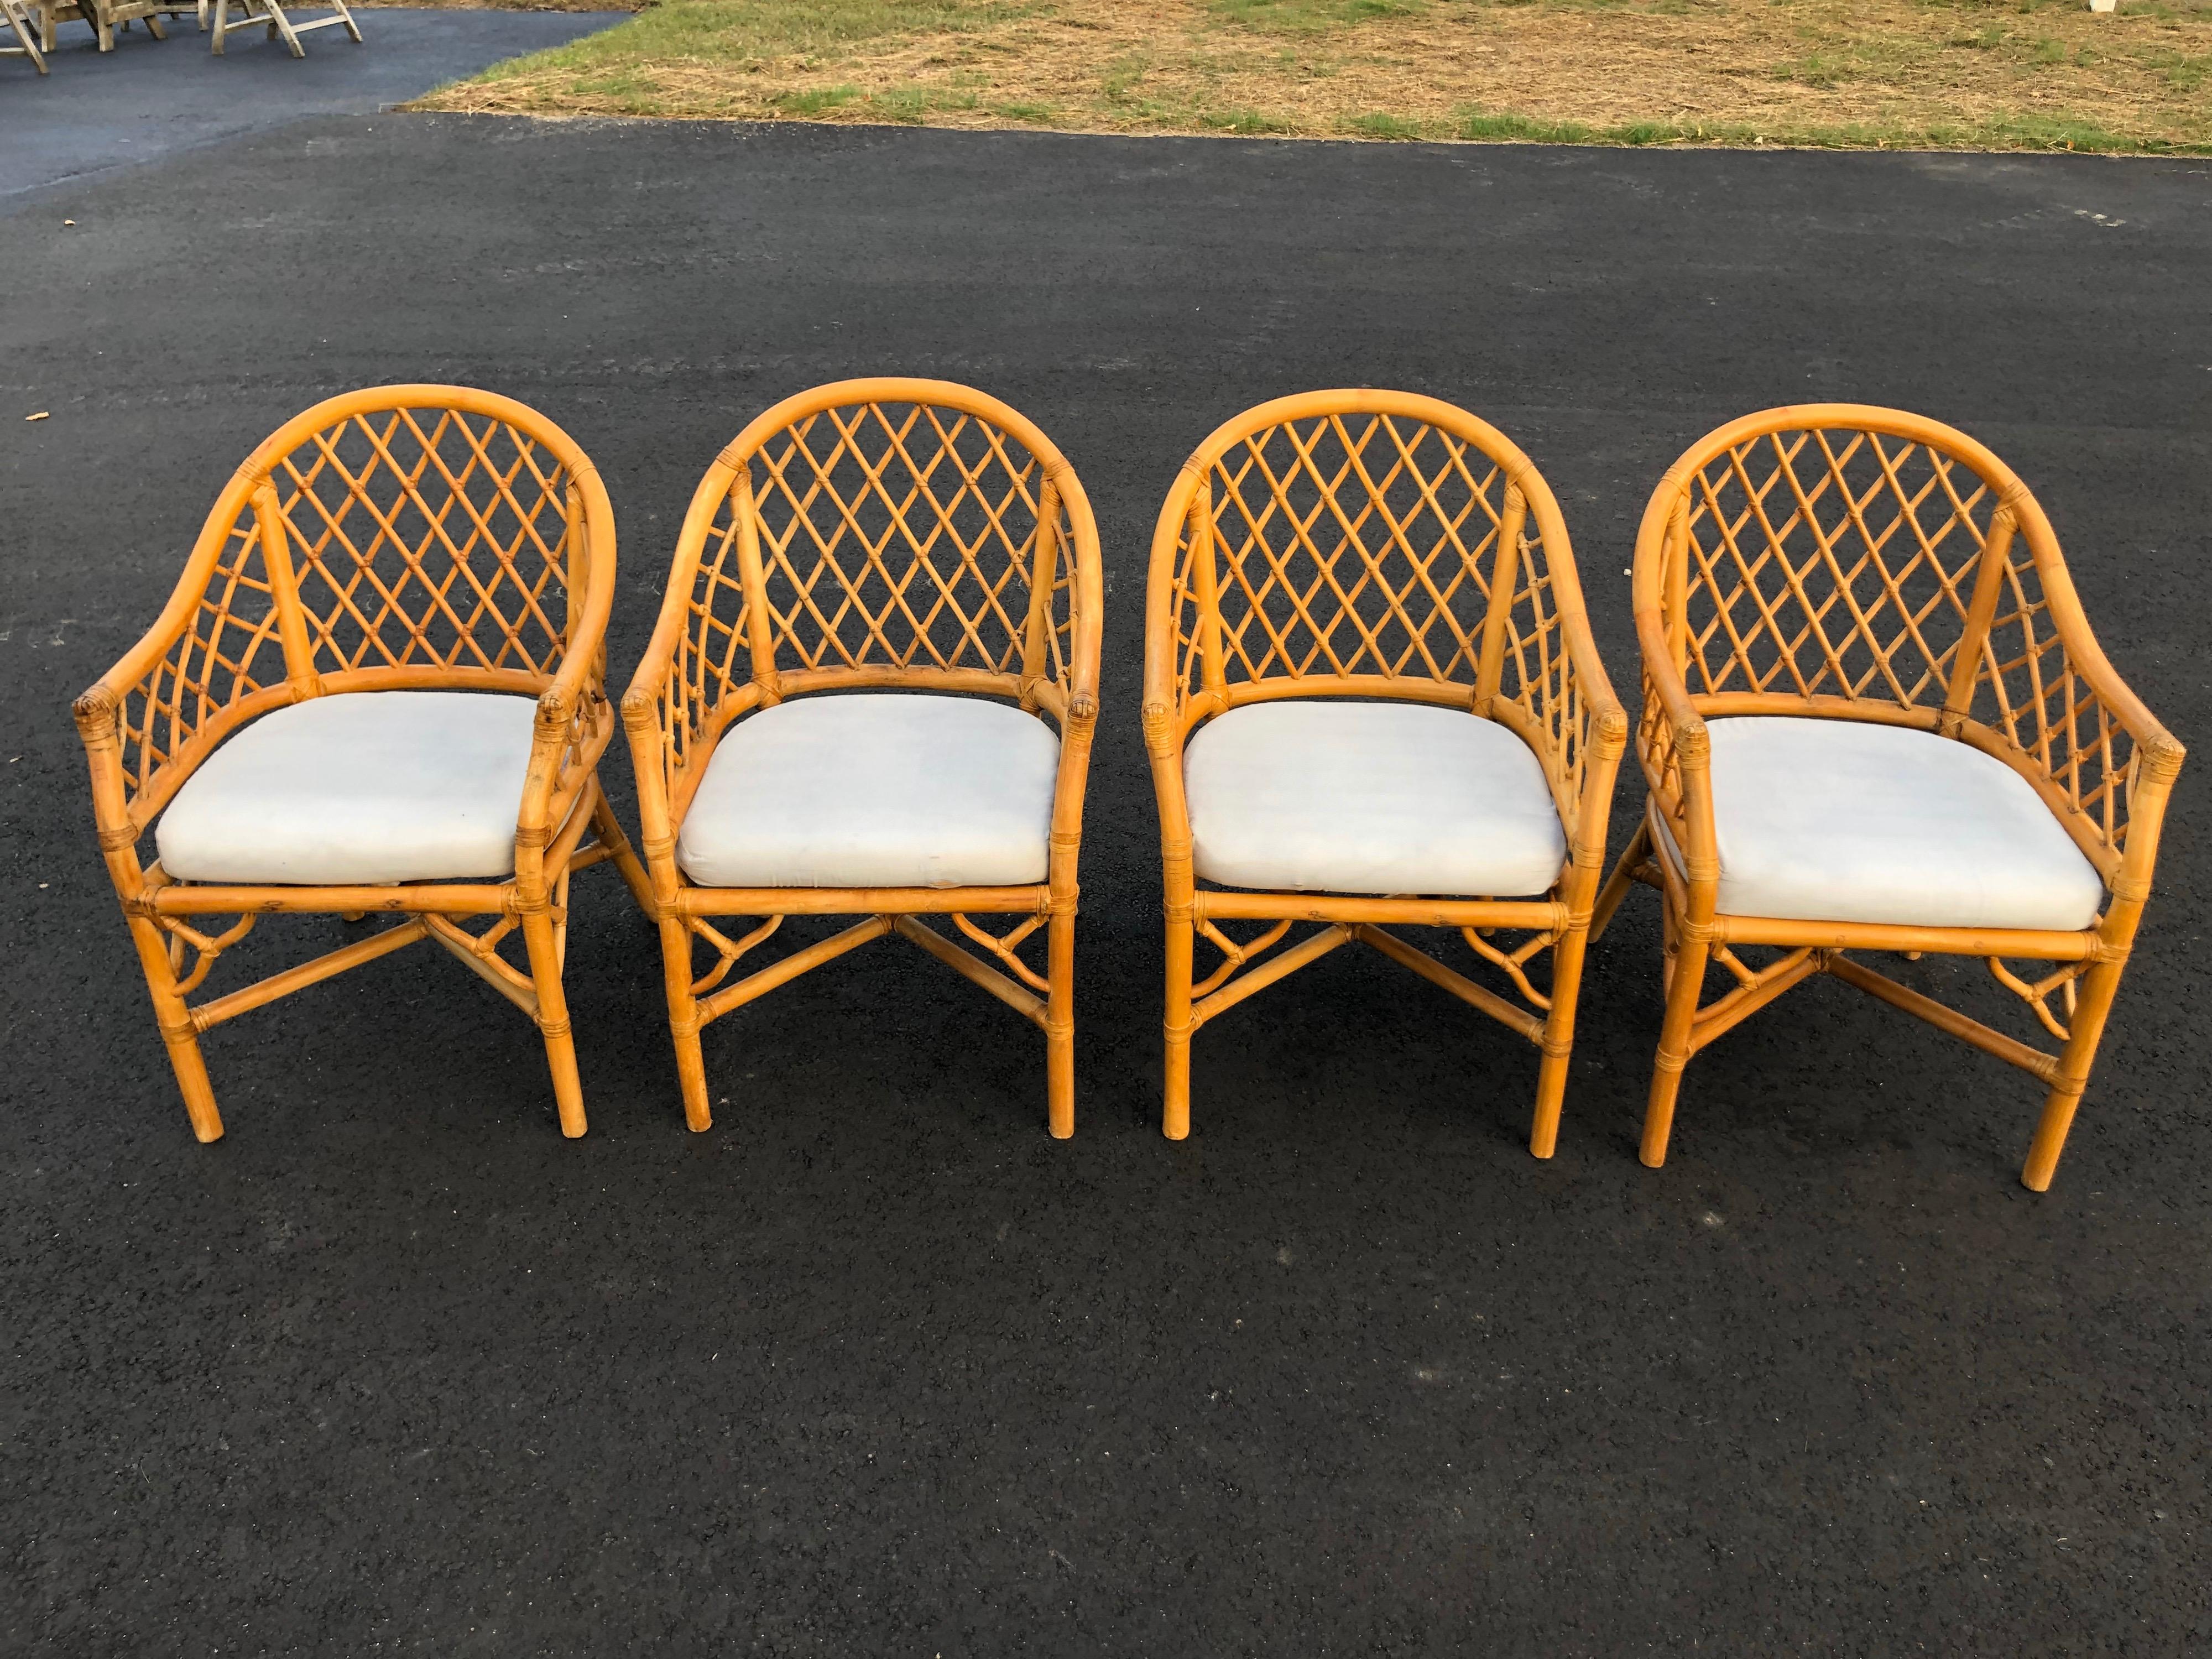 Set of four bamboo chairs in the style of McGuire. They each have an off white/beige seat cushion. Boho chic style with a casual coastal look.

One matching dining table and one side table available with various size glass tops.
  